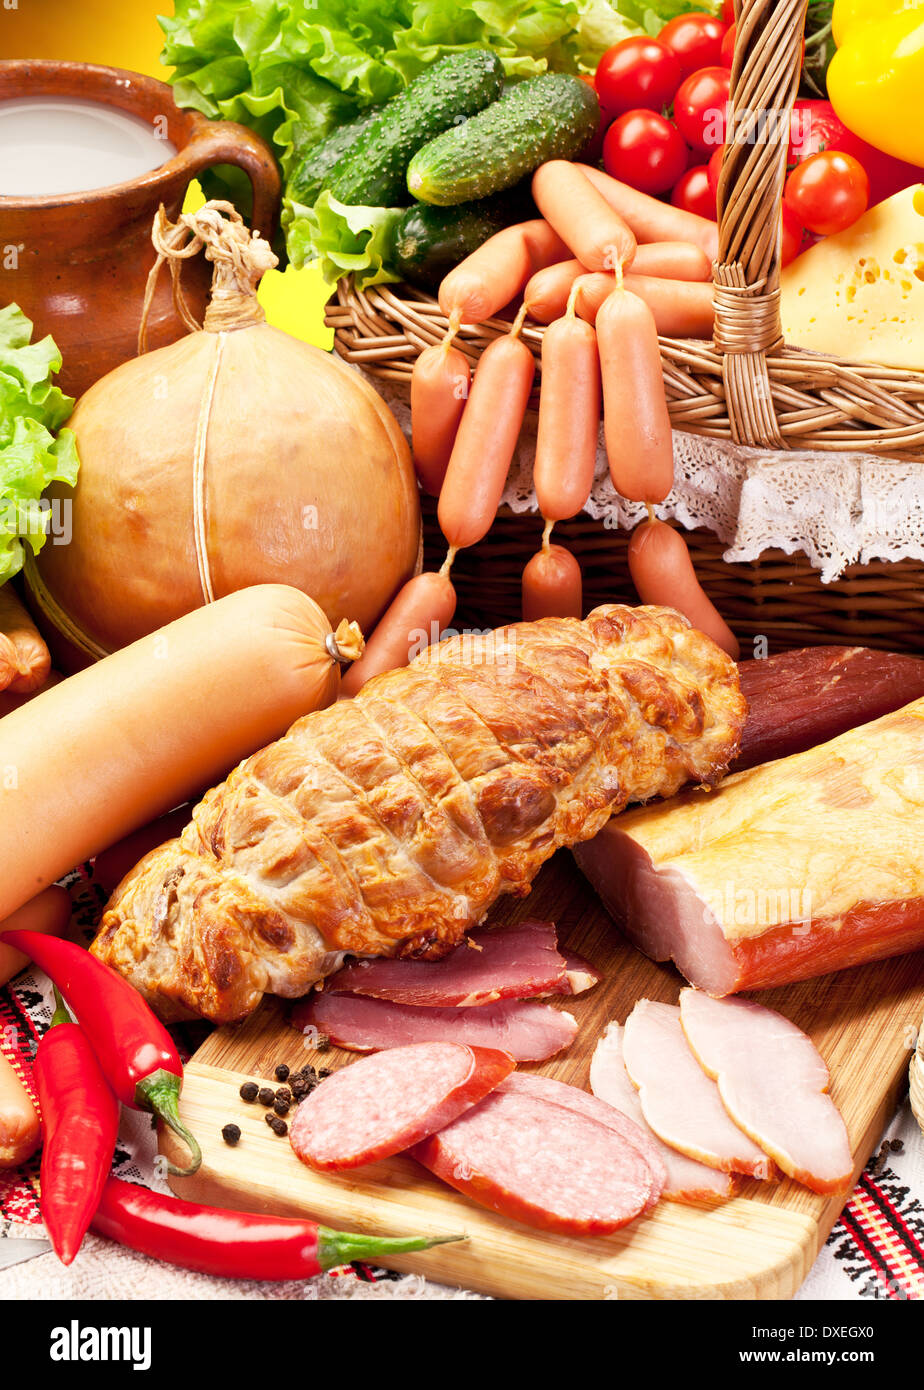 Variety of sausages with vegetables and milk products. Stock Photo